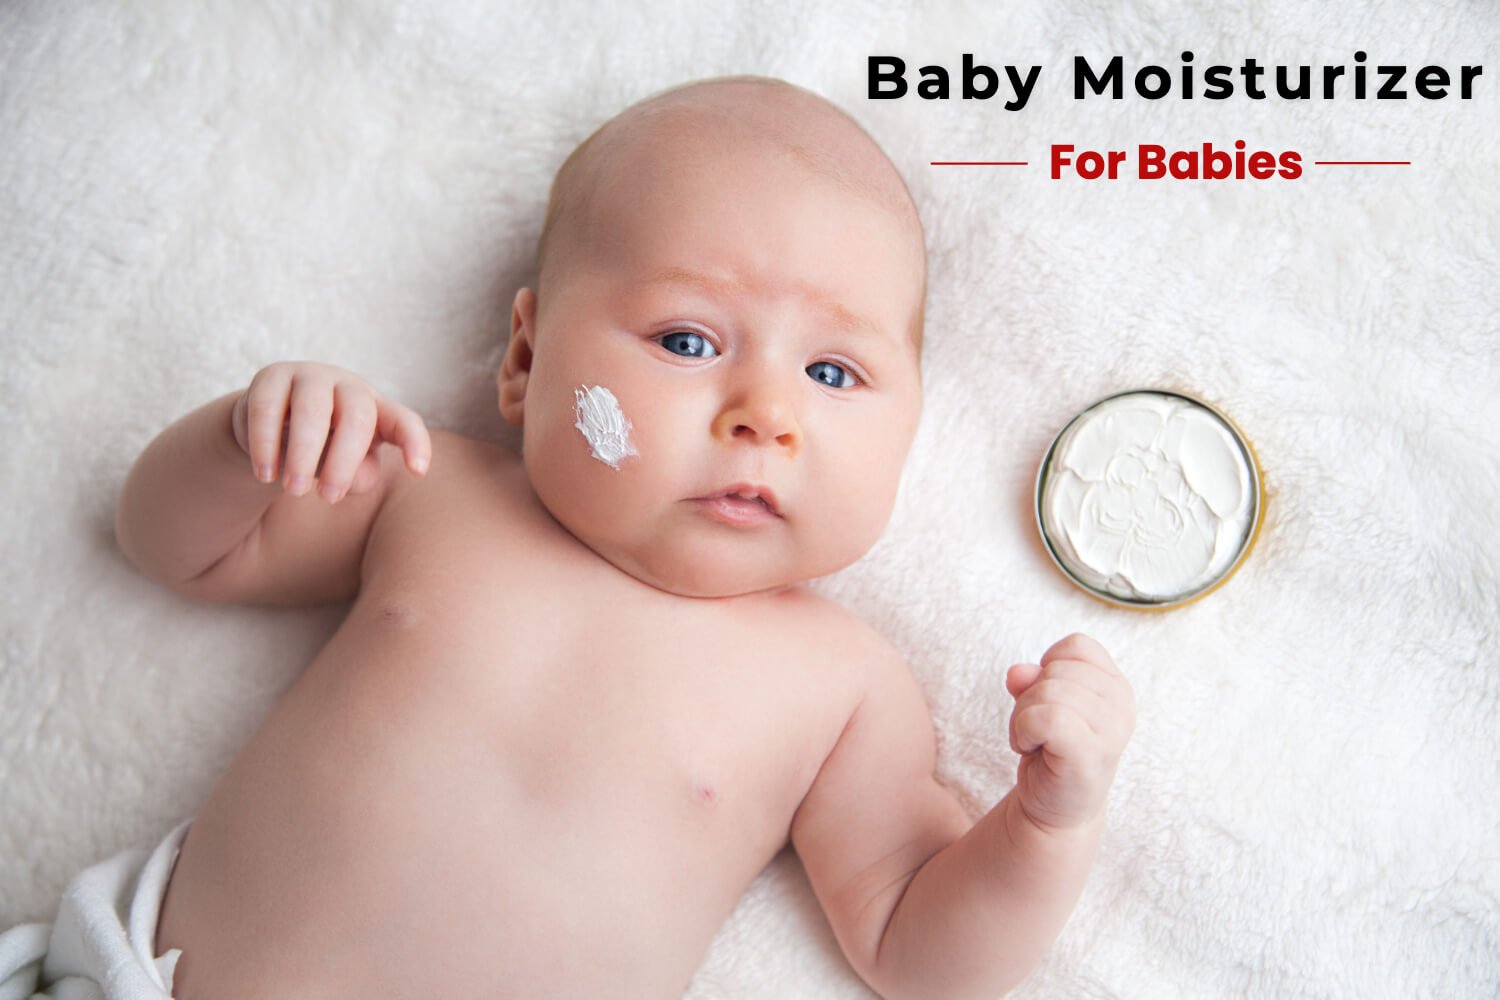 How to Choose the Right Baby Moisturizer For Your Baby?